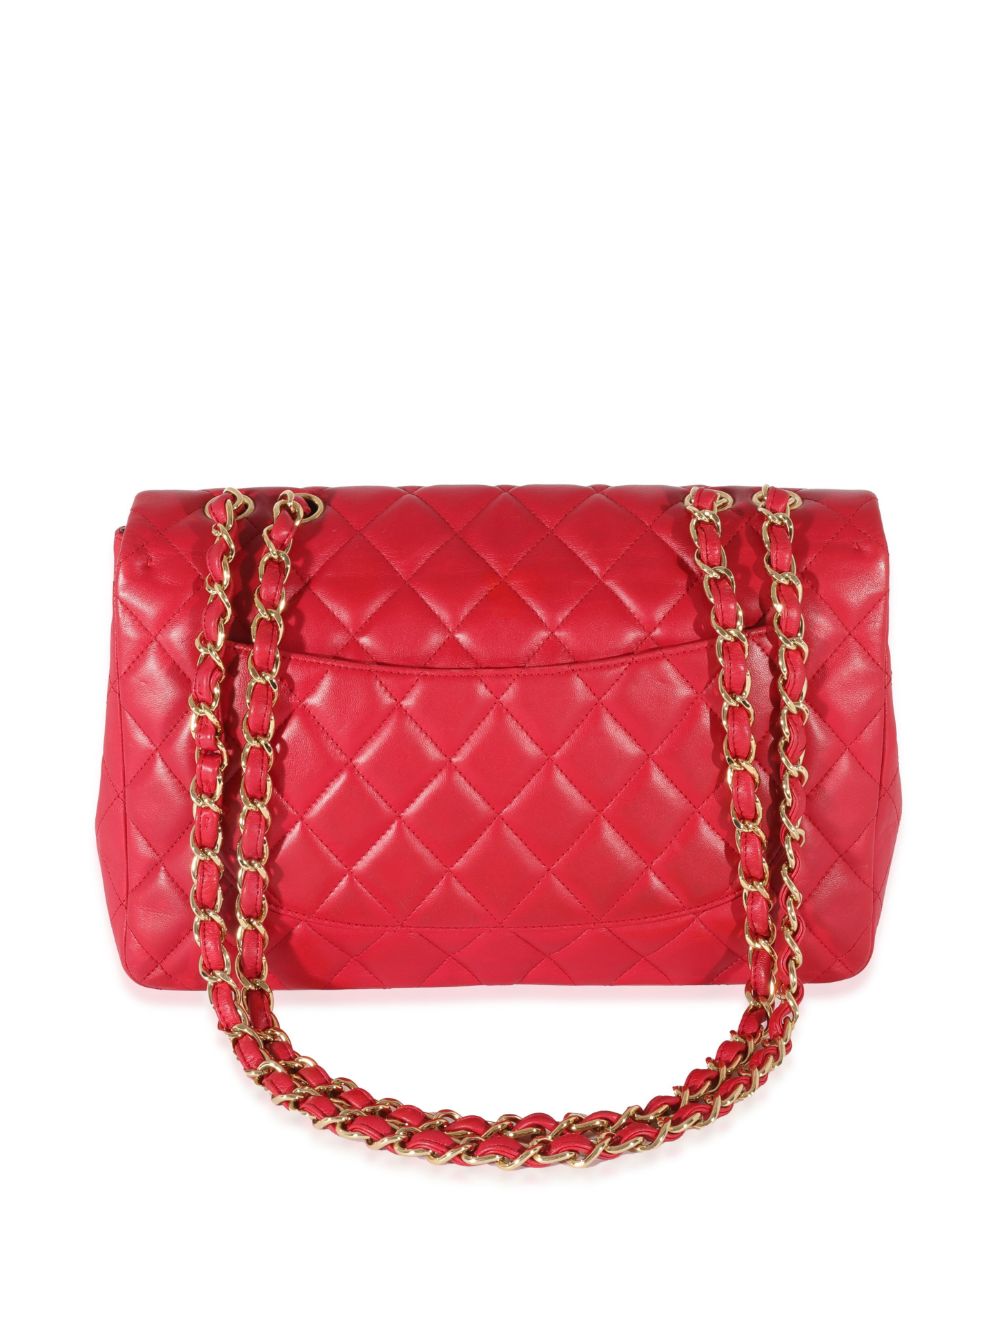 Pre-owned Chanel 2008-2009 Jumbo Classic Flap Shoulder Bag In Pink ...